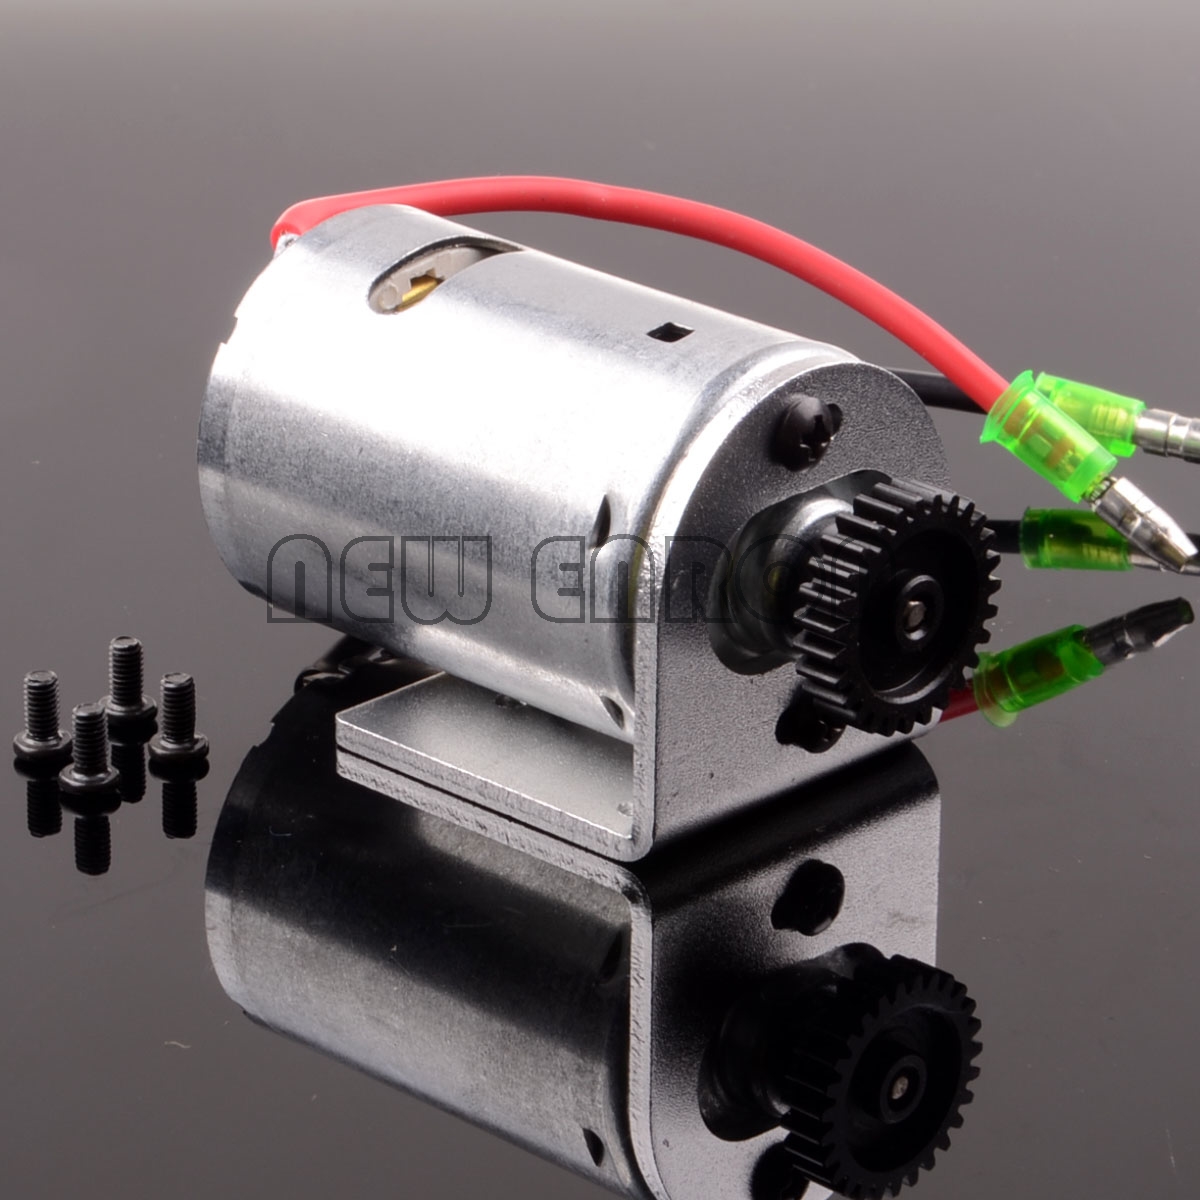 Brushed 540 Electric Engine Motor 27T Gear Motor Mount For RC Wltoys 1/18 Car A949 A959 A969 A979 K929 Off-Road Truck Parts